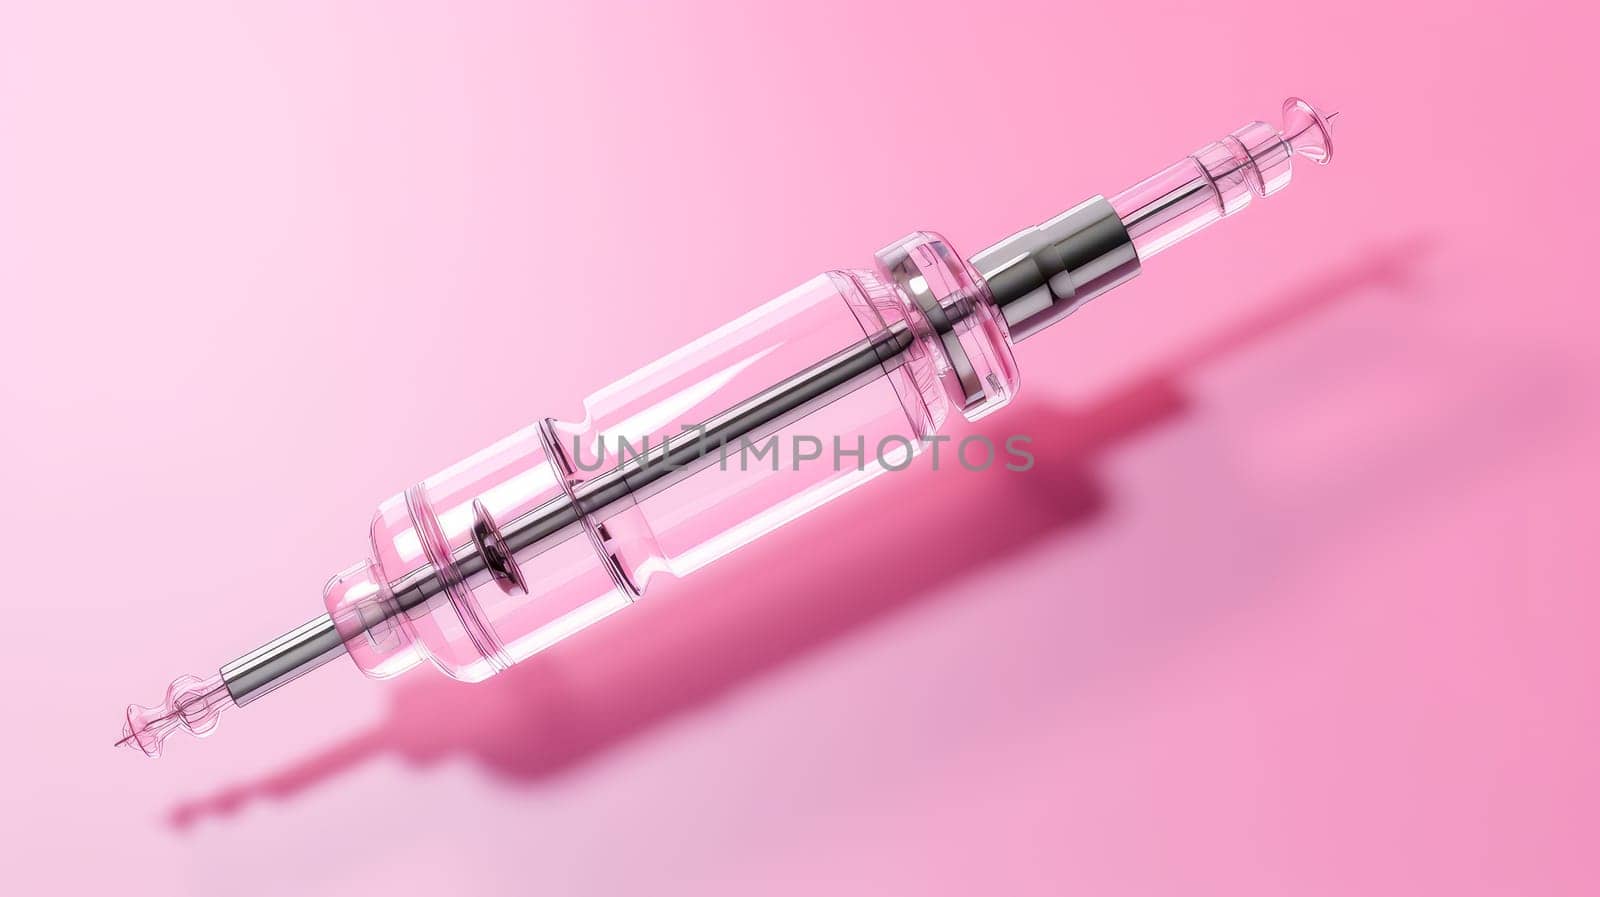 A syringe with a vaccine against diseases on a pink background. Medicine, treatment in a medical institution, healthy lifestyle, medical life insurance, pharmacies, pharmacy, treatment in a clinic.